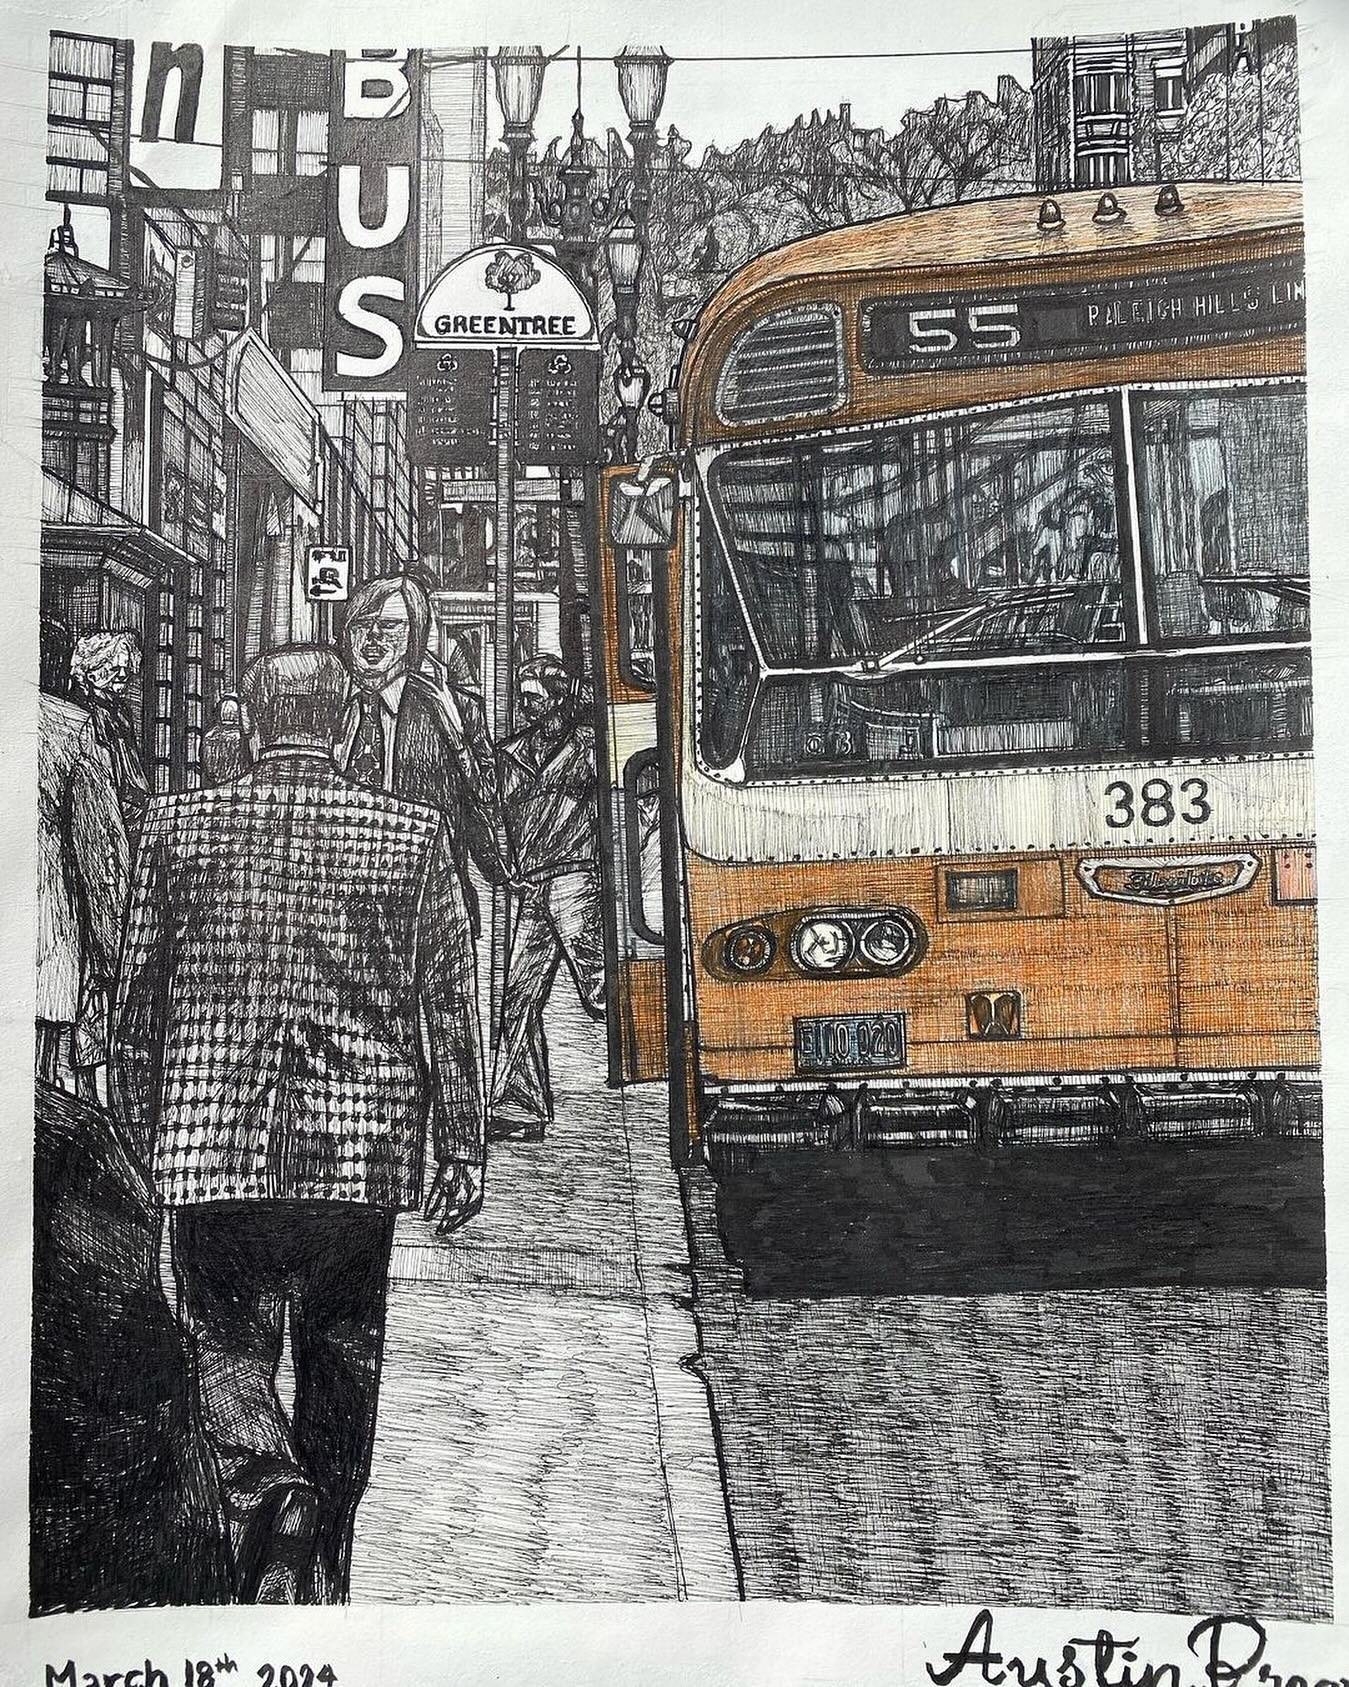 New work by Austin Brague! We can&rsquo;t get enough of that jacket&hellip; 🫠
.
.
Follow @austin_does_art_ to see Austin&rsquo;s creative process and expanded portfolio.
.
.
.
Image description: a pen and ink drawing of a vintage TriMet bus, includi